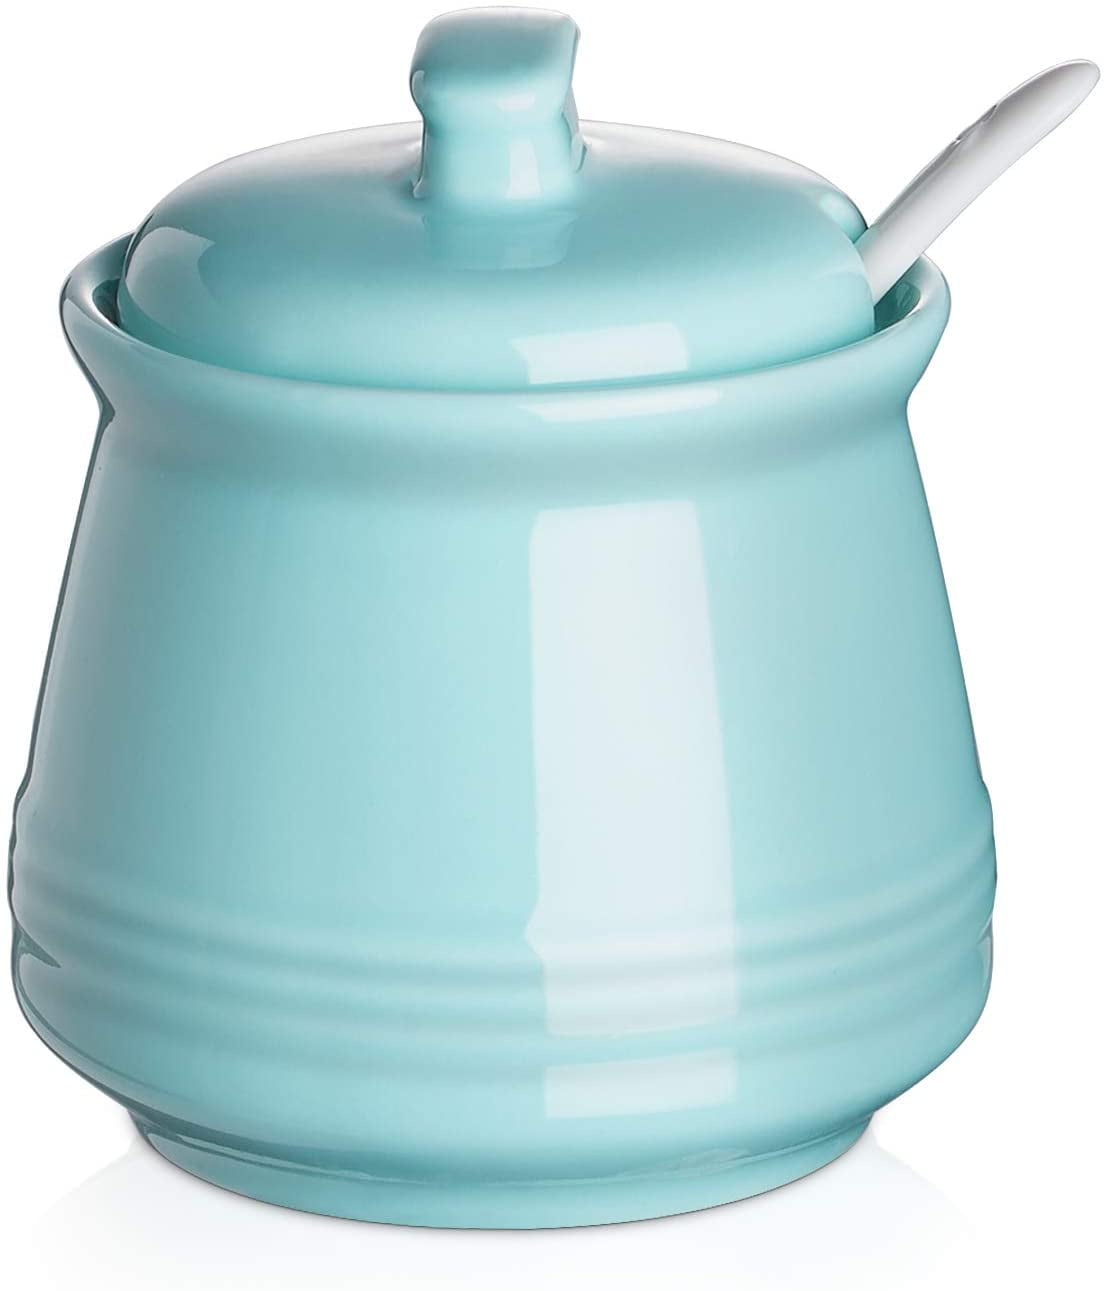 Coffee Bar Accessories Turquoise Product Image DOWAN Porcelain Sugar Bowl 12 Ou 12 Ounce Ceramic Sugar Bowl with Lid Sugar Canister Suit for Coffee Bar Restaurant Sugar Bowl with Spoon and Lid 